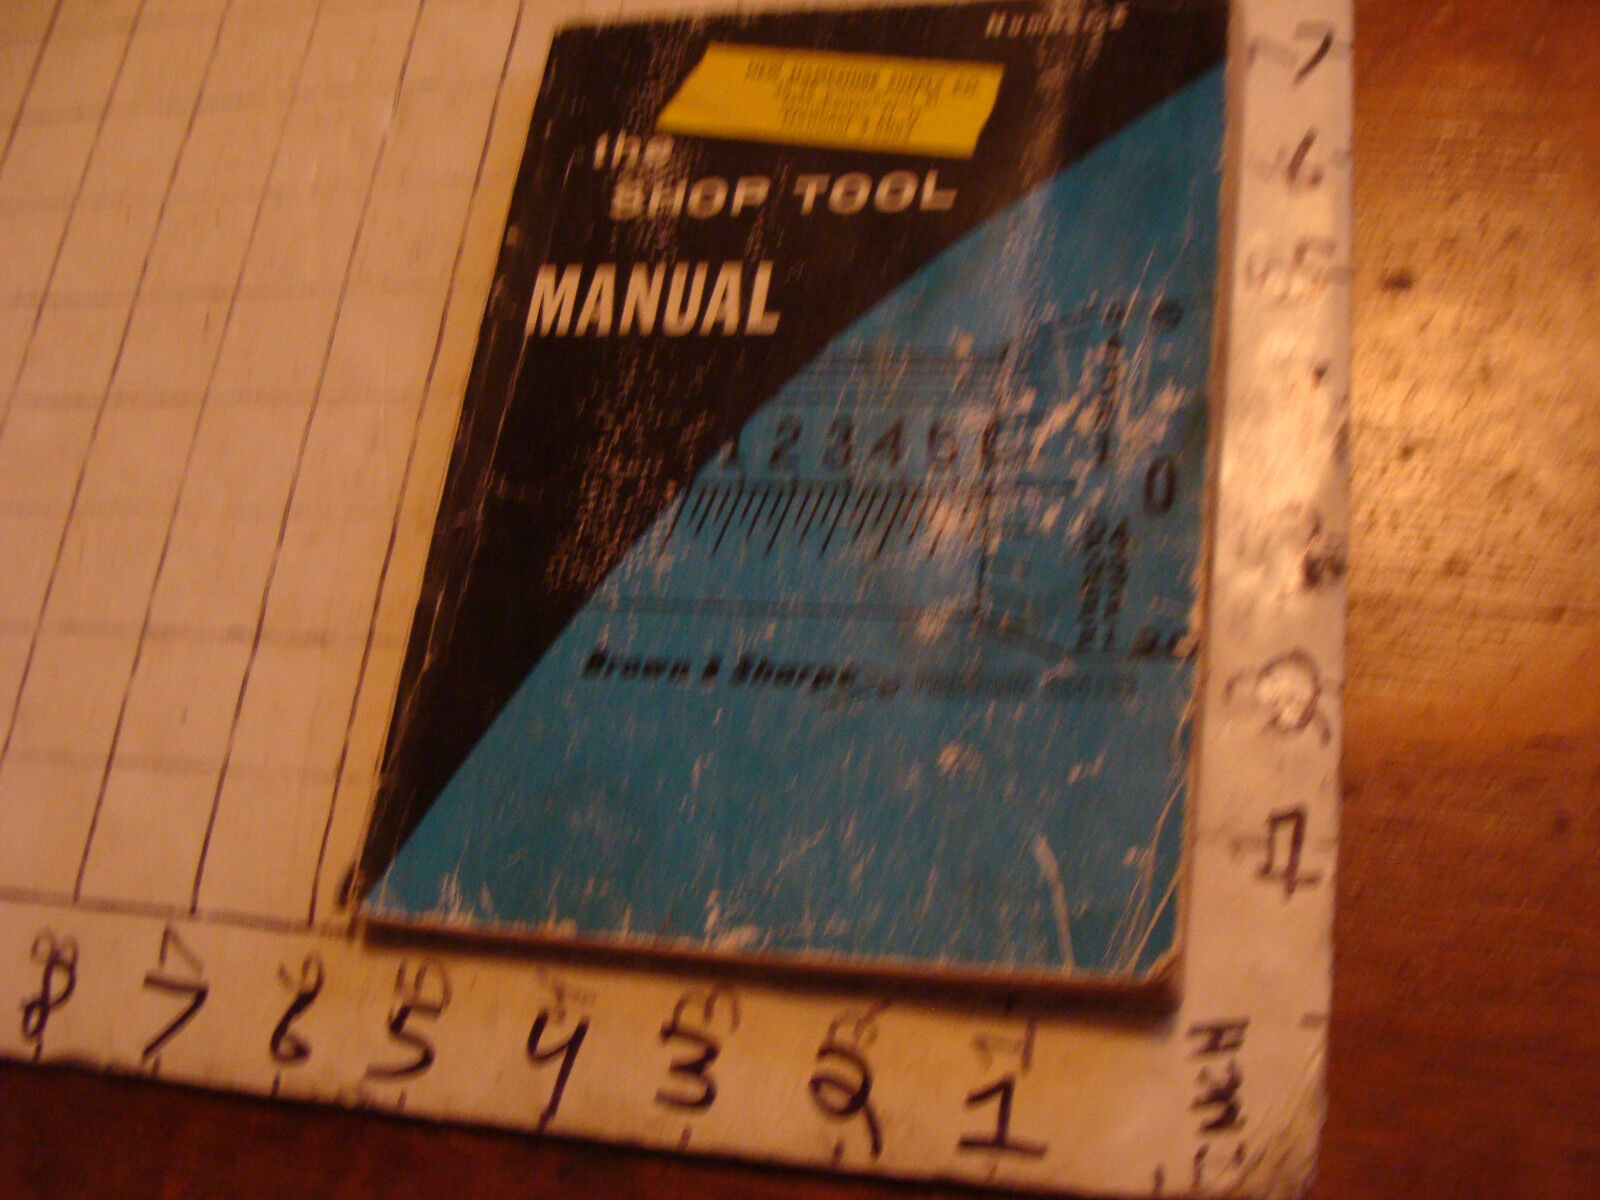 Vintage The Shop Manual brown & sharpe number I; 160pgs, HEAVILY STAINED 